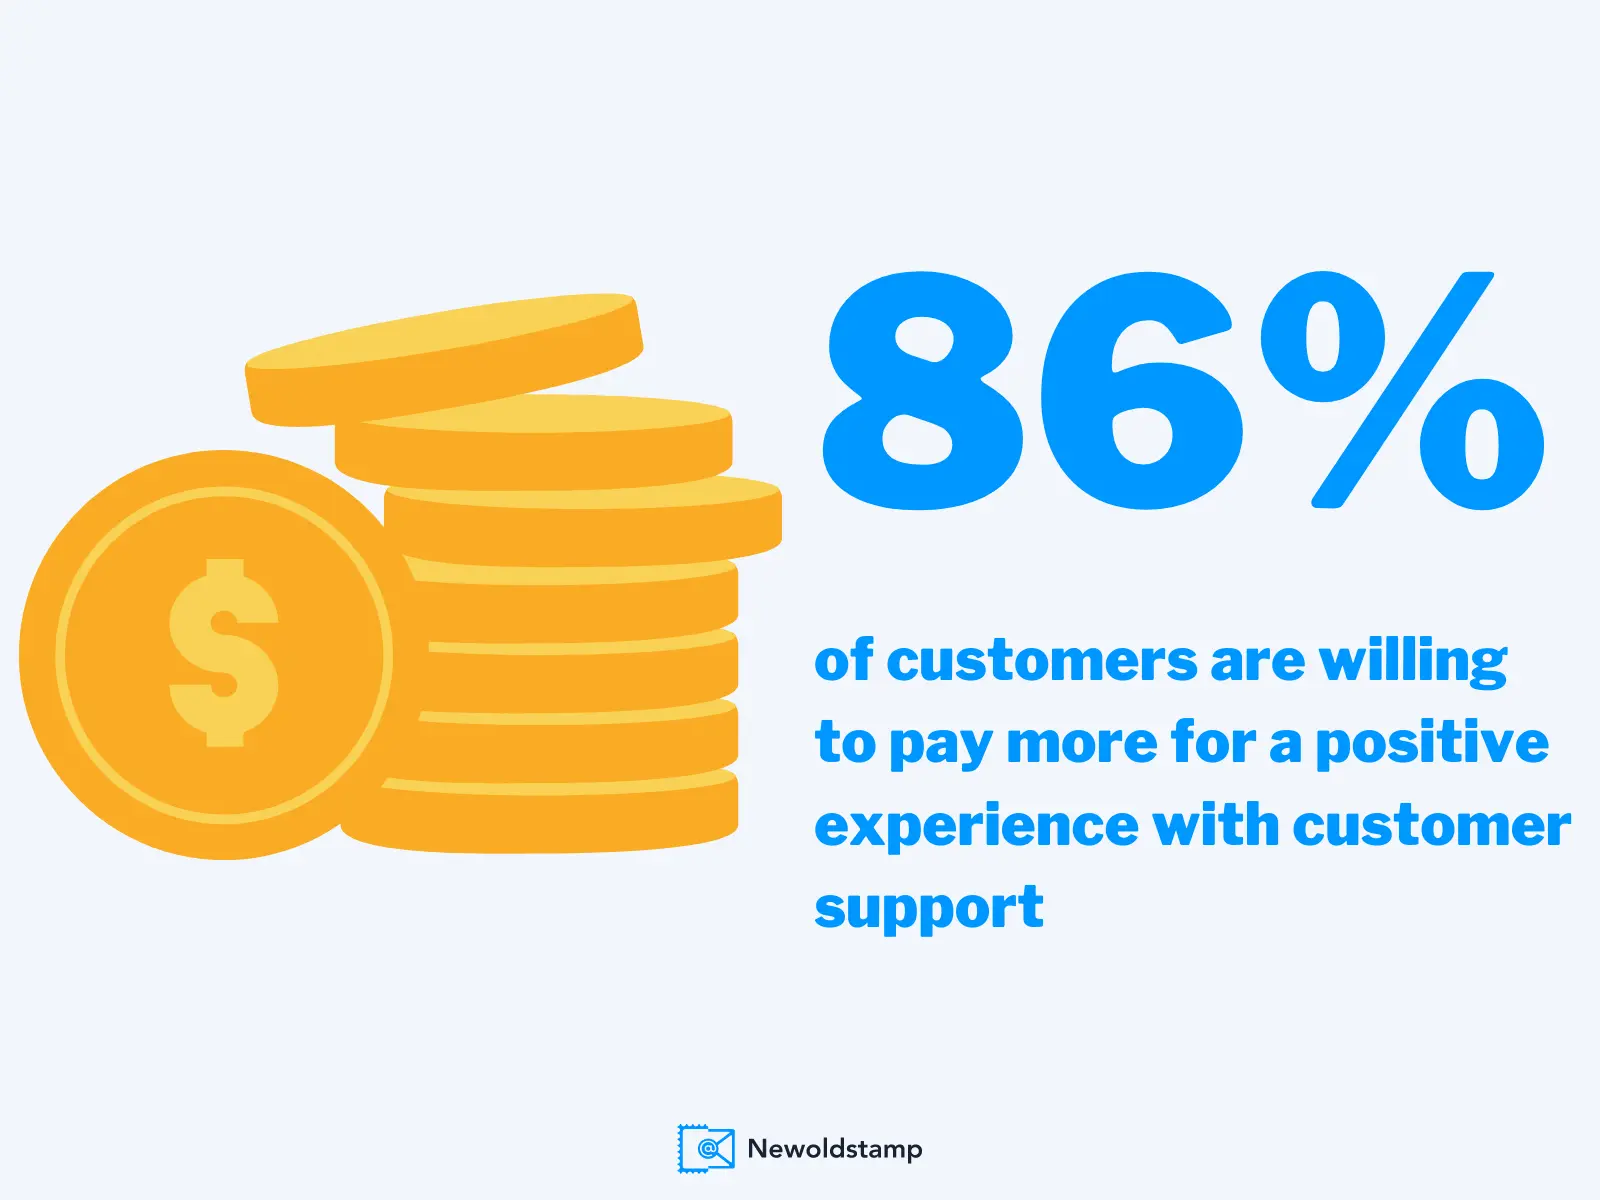 Customers value the experience they have with support